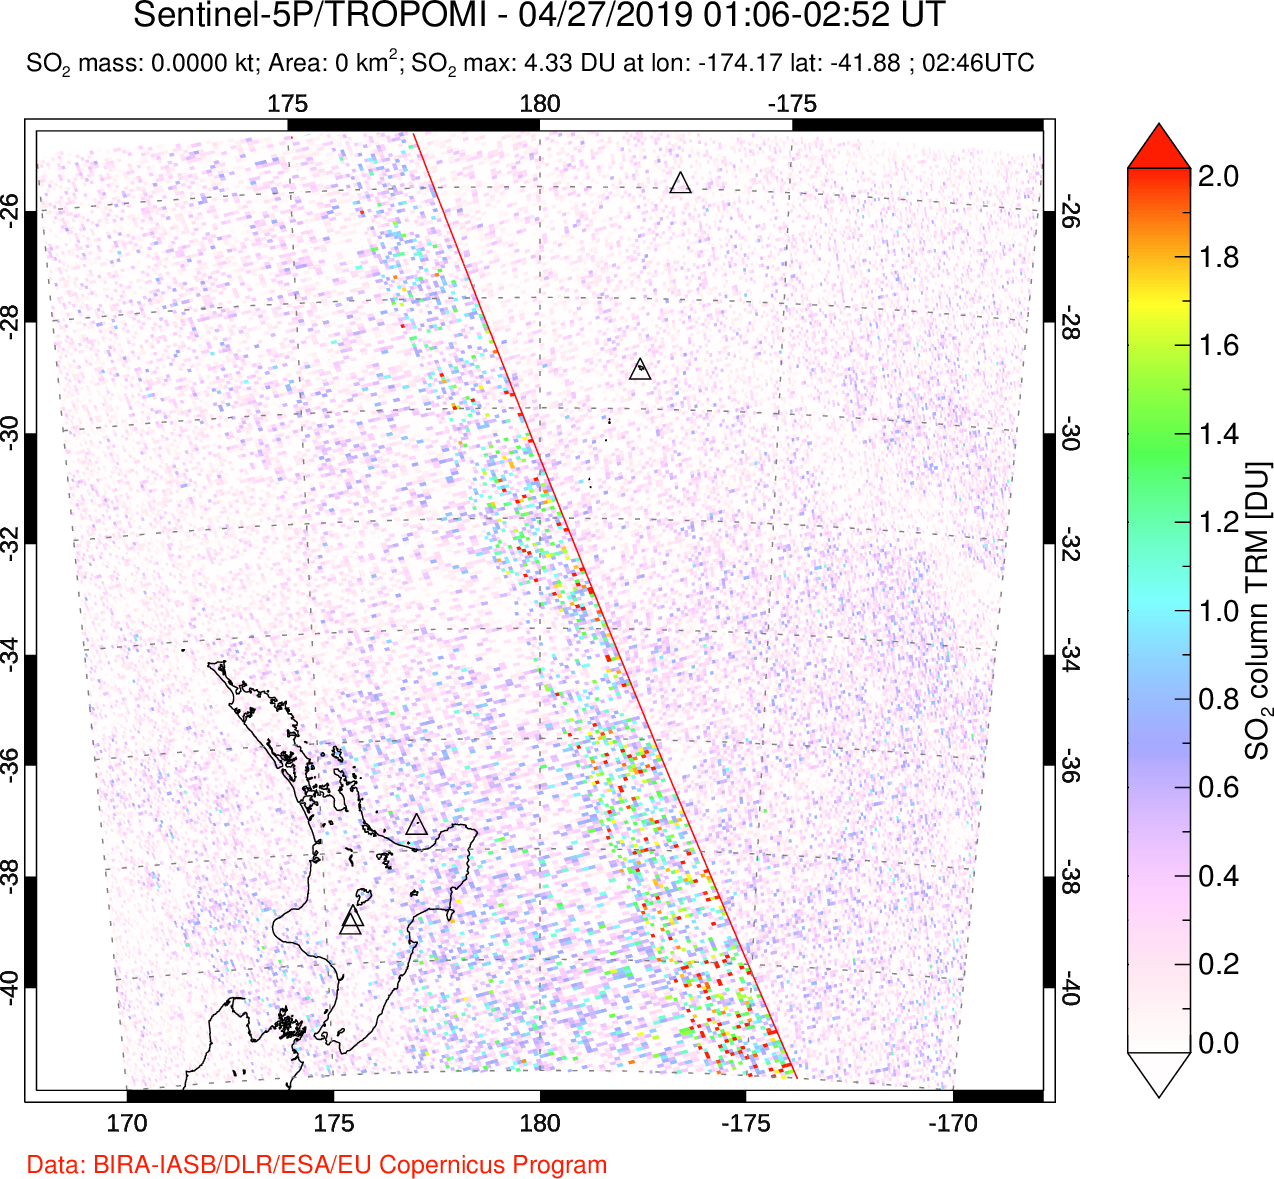 A sulfur dioxide image over New Zealand on Apr 27, 2019.